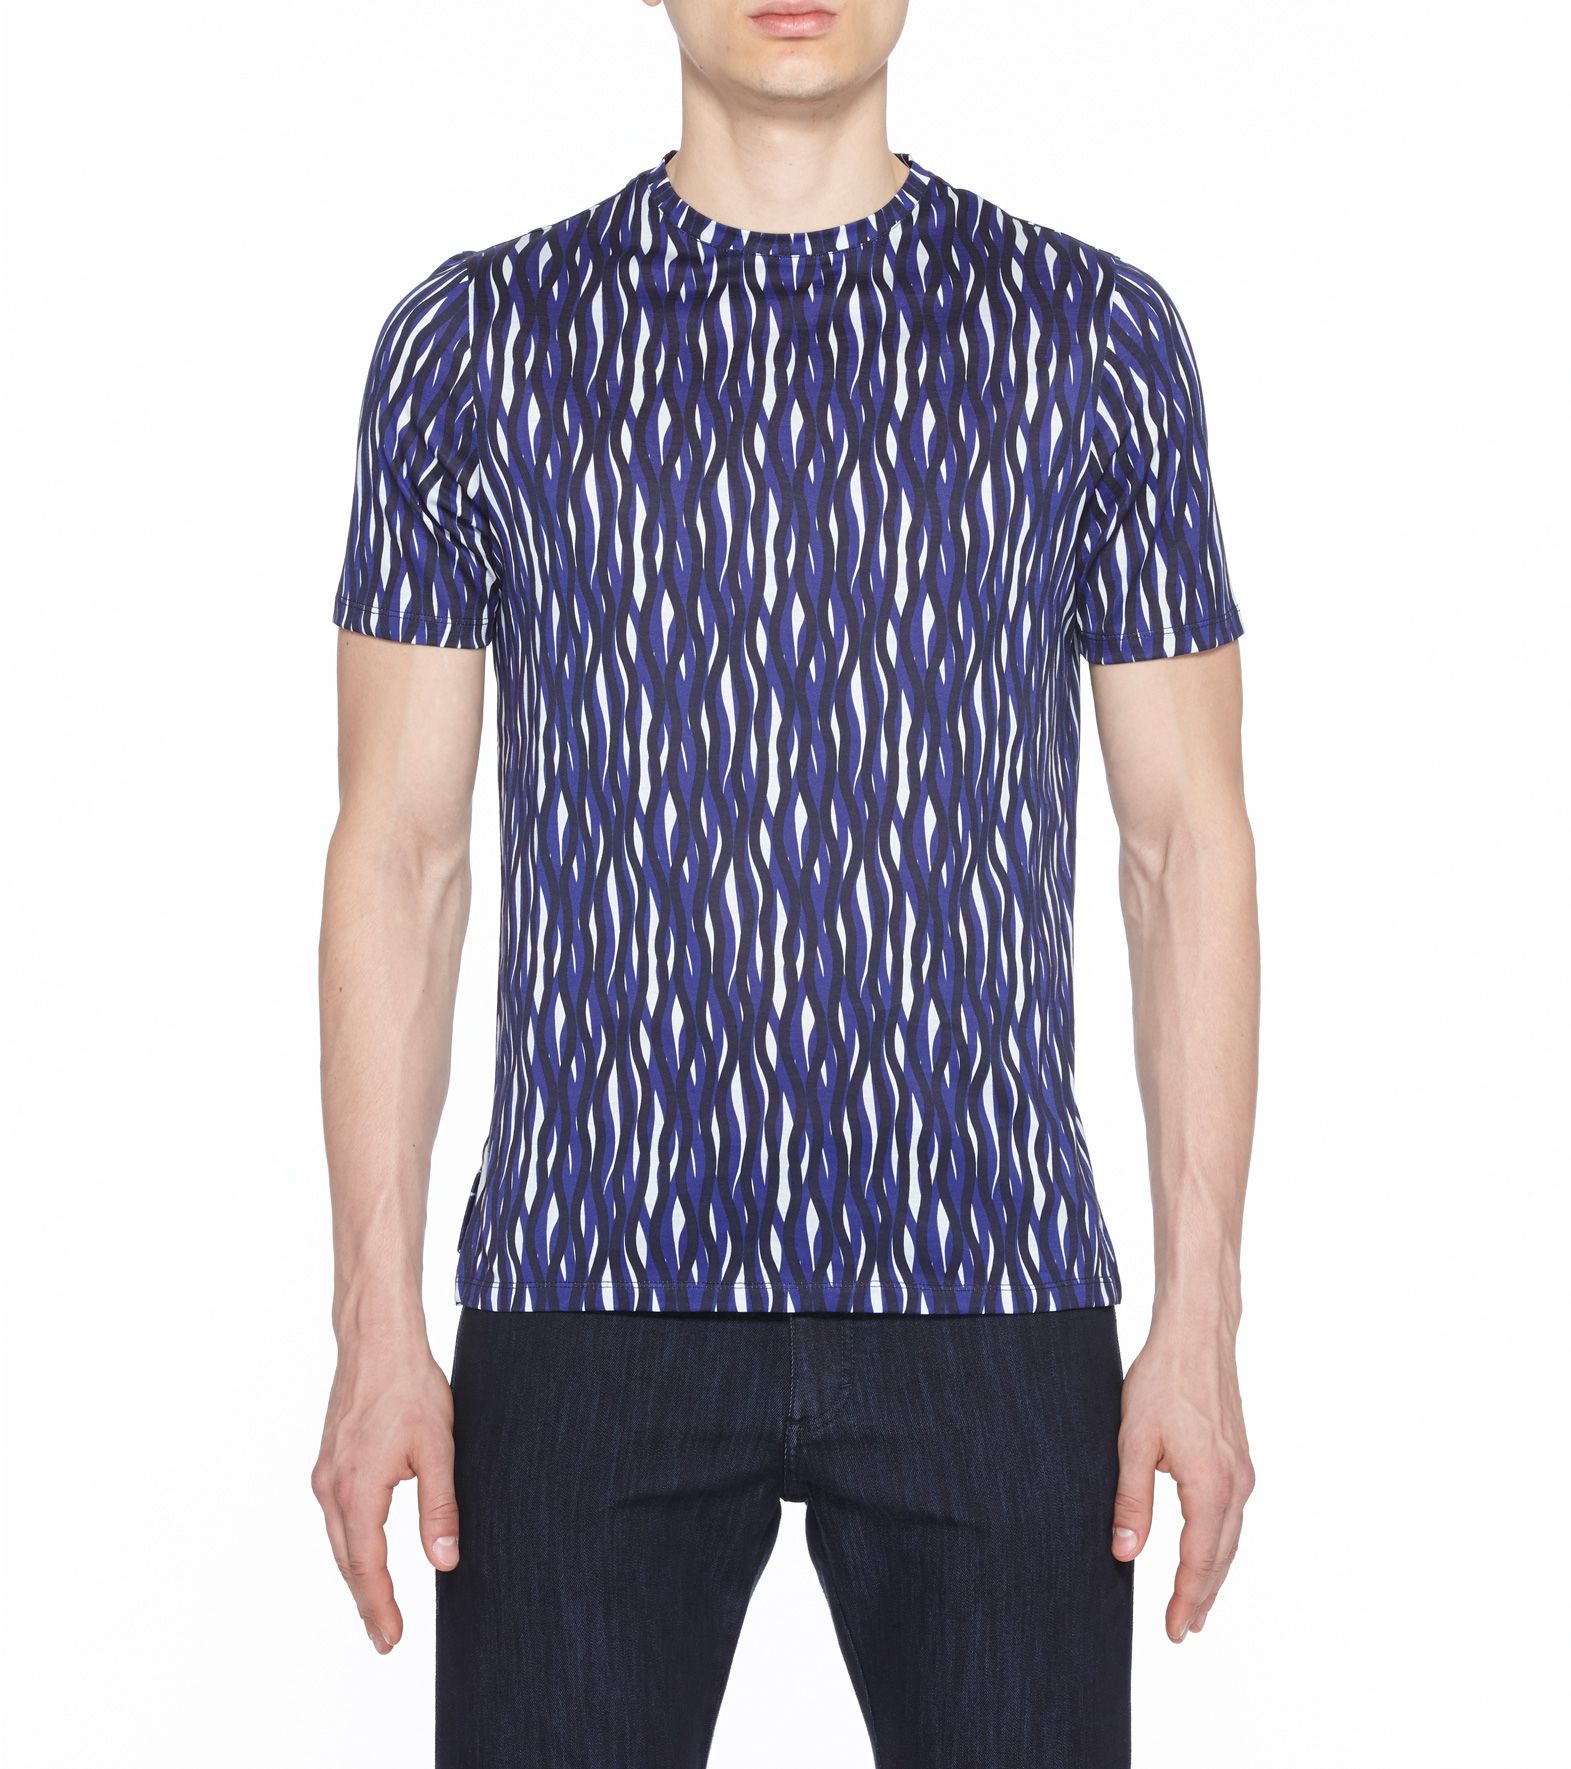 Z Zegna Special Edition Spring/Summer 2014 T-Shirt – The Fashionisto